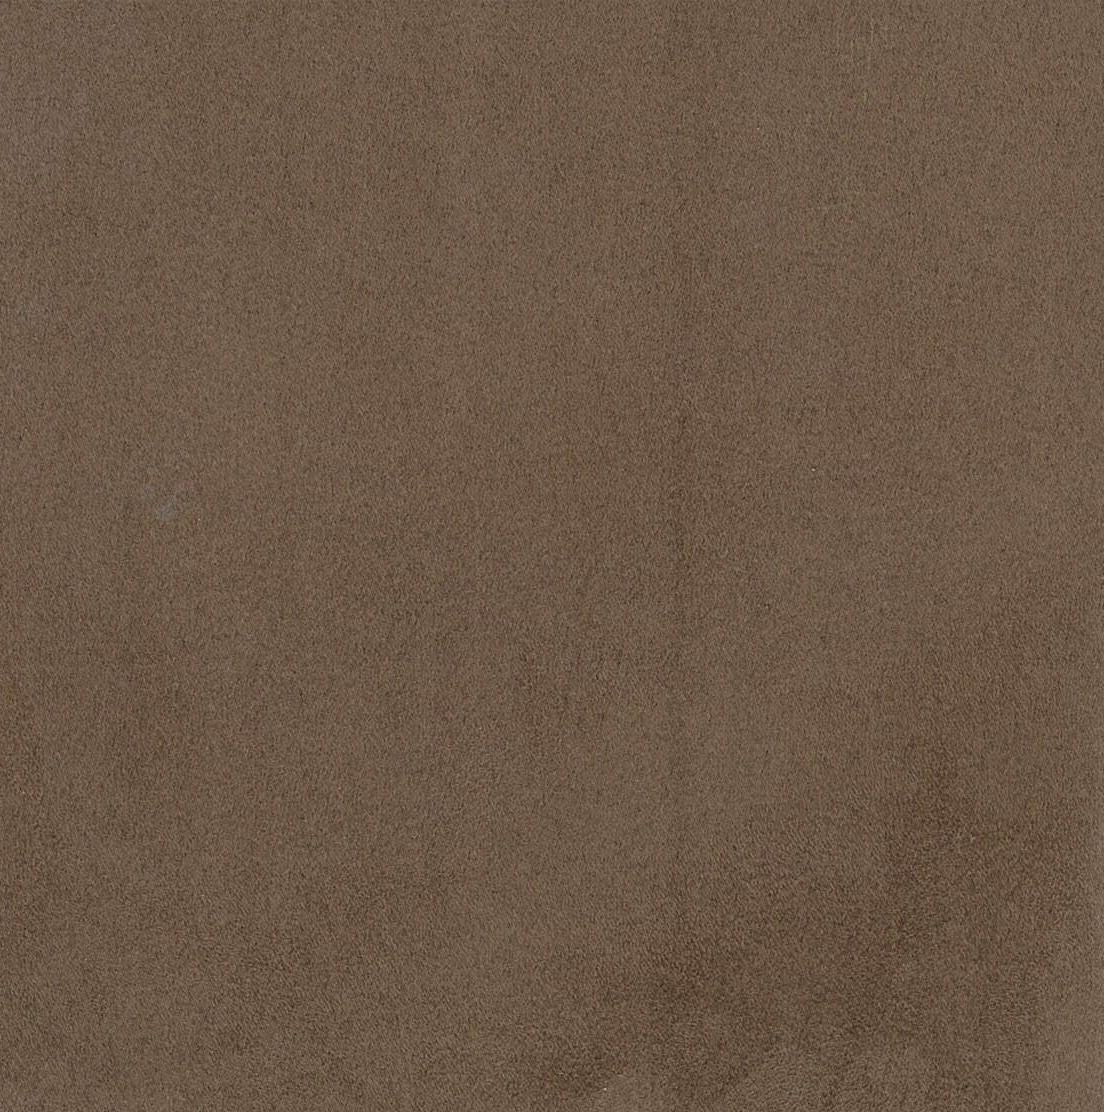 Sarabelle Suede fabric in mocha color - pattern number H6 0005SARA - by Scalamandre in the Old World Weavers collection